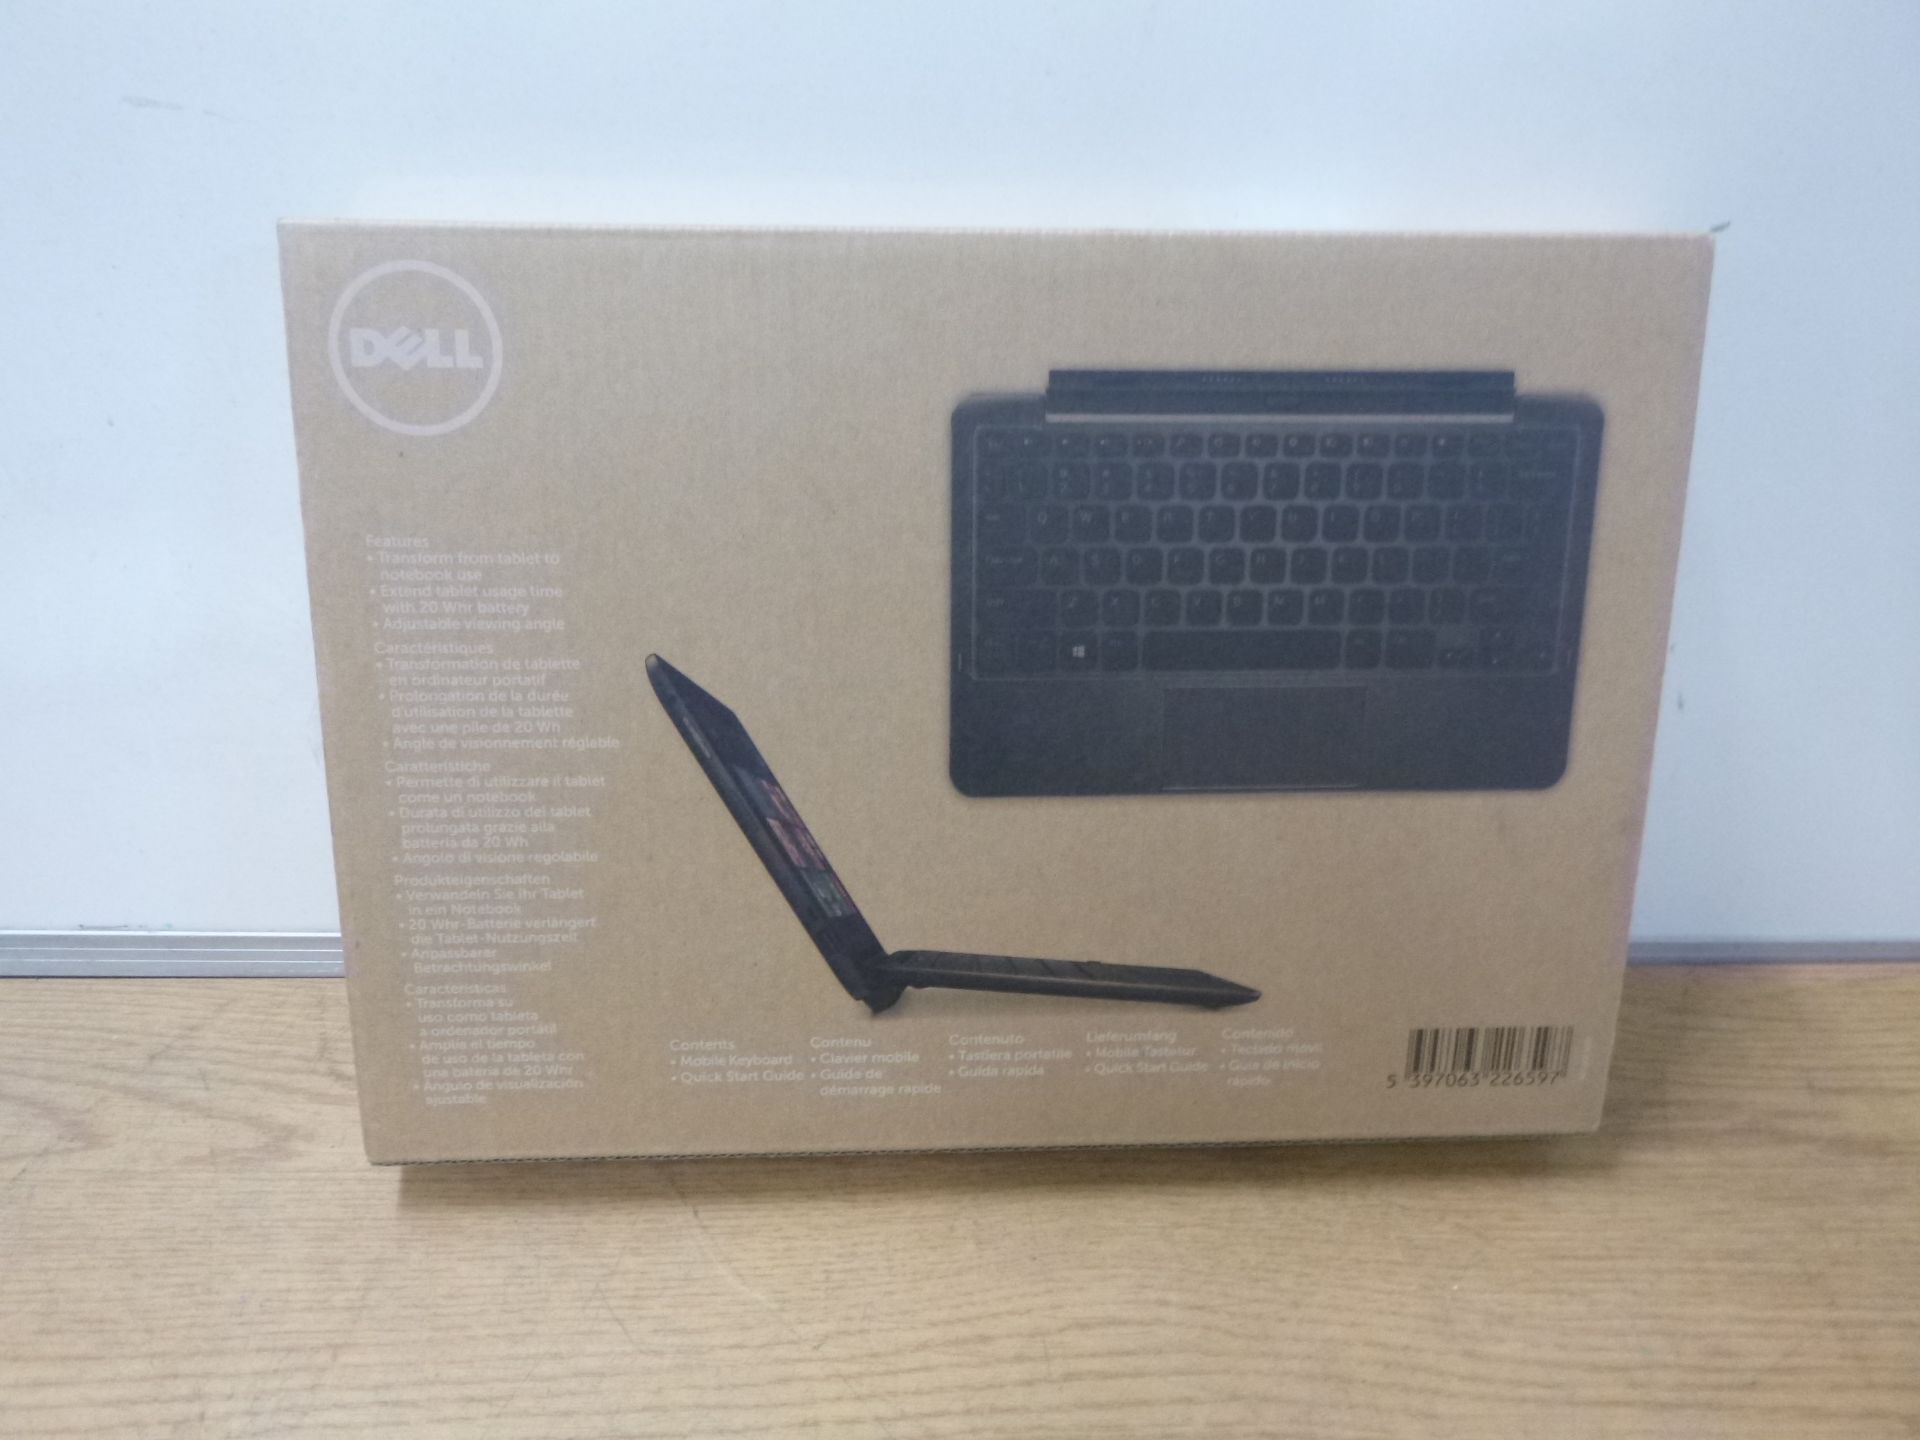 DELL VENUE 11 PRO MOBILE KEYBOARD 5130/7130/7139/7140. BOXED - Image 2 of 2